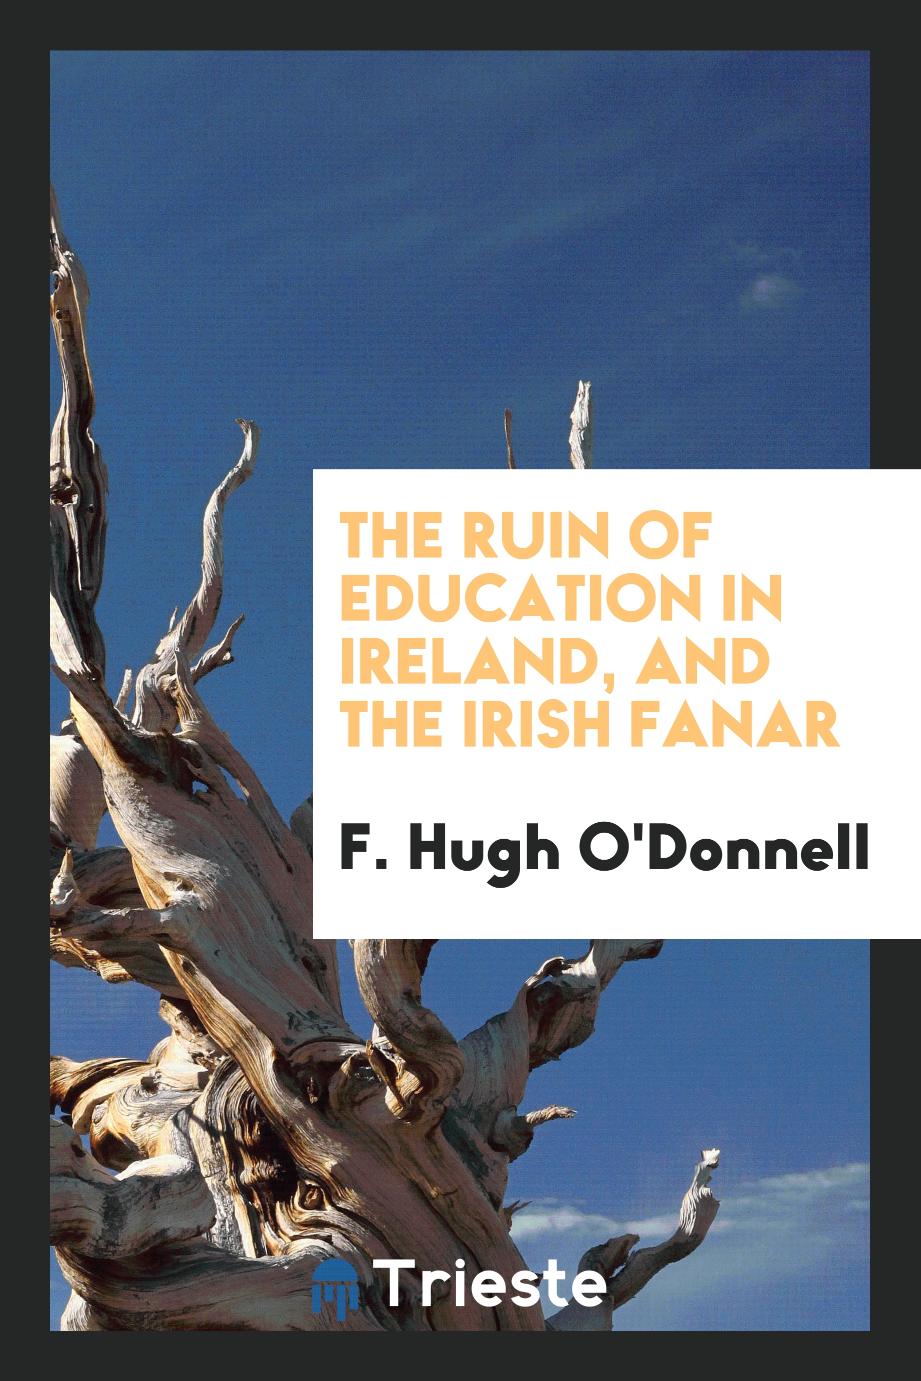 The ruin of education in Ireland, and the Irish Fanar